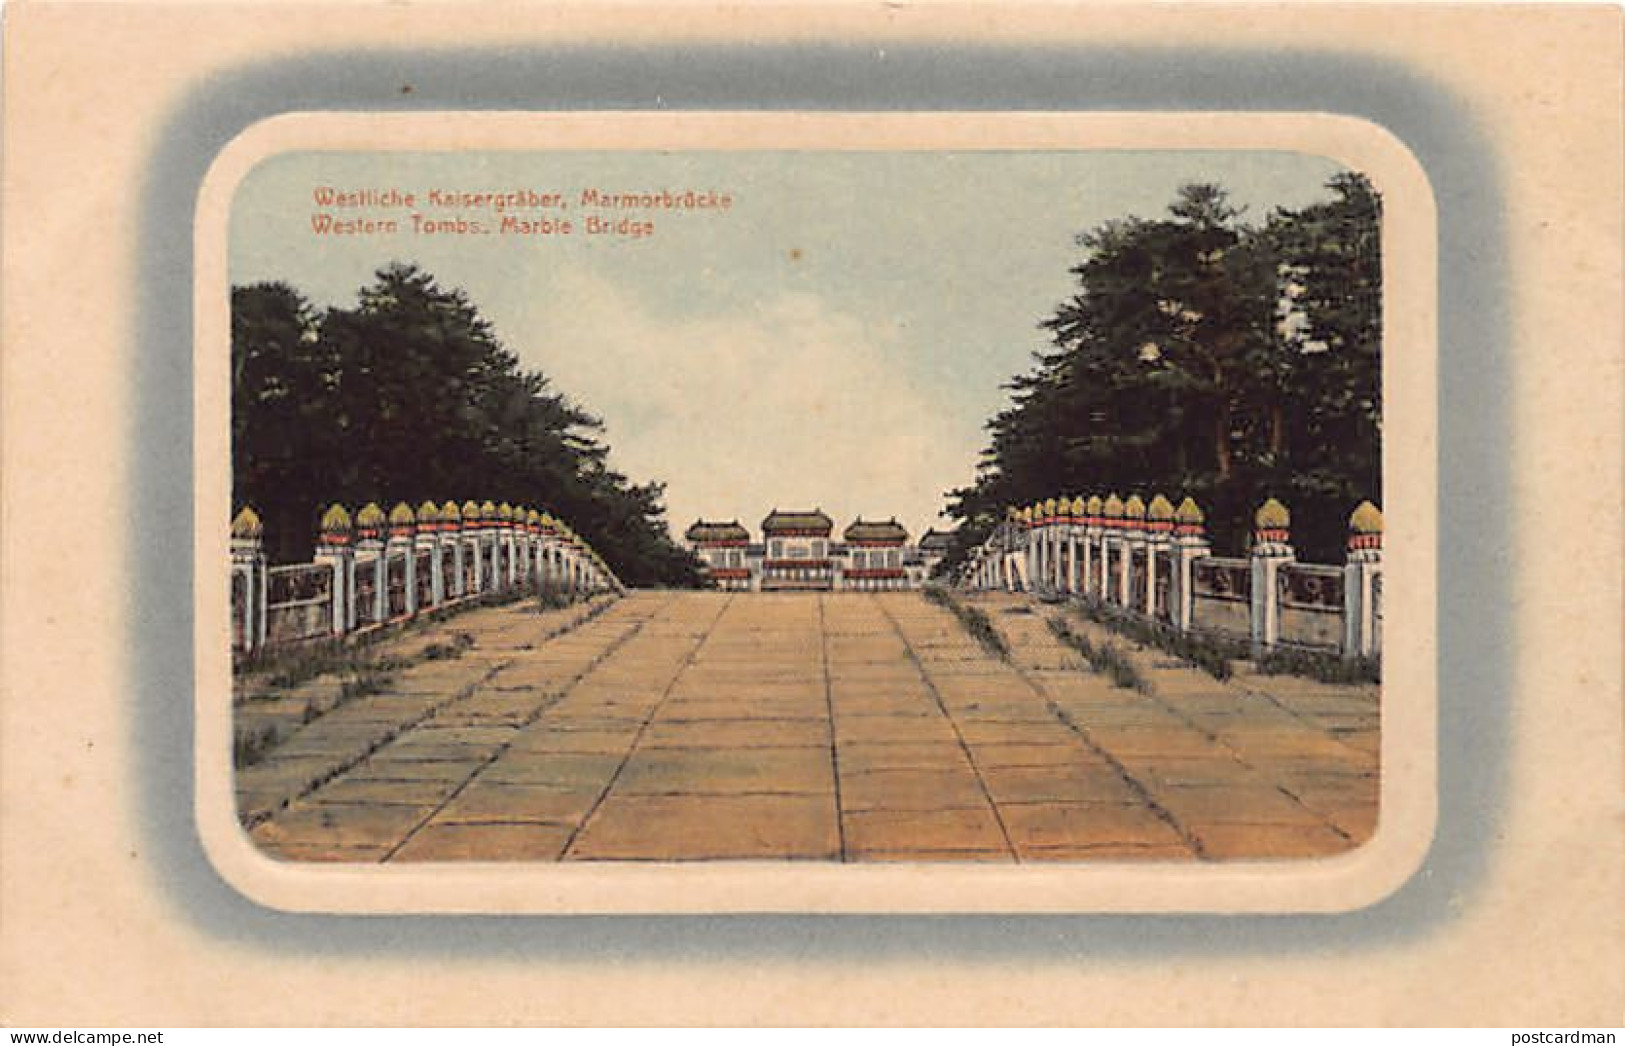 China - BEIJING - Marble Bridge - Western Tombs - Publ. Unknown 75 - Chine